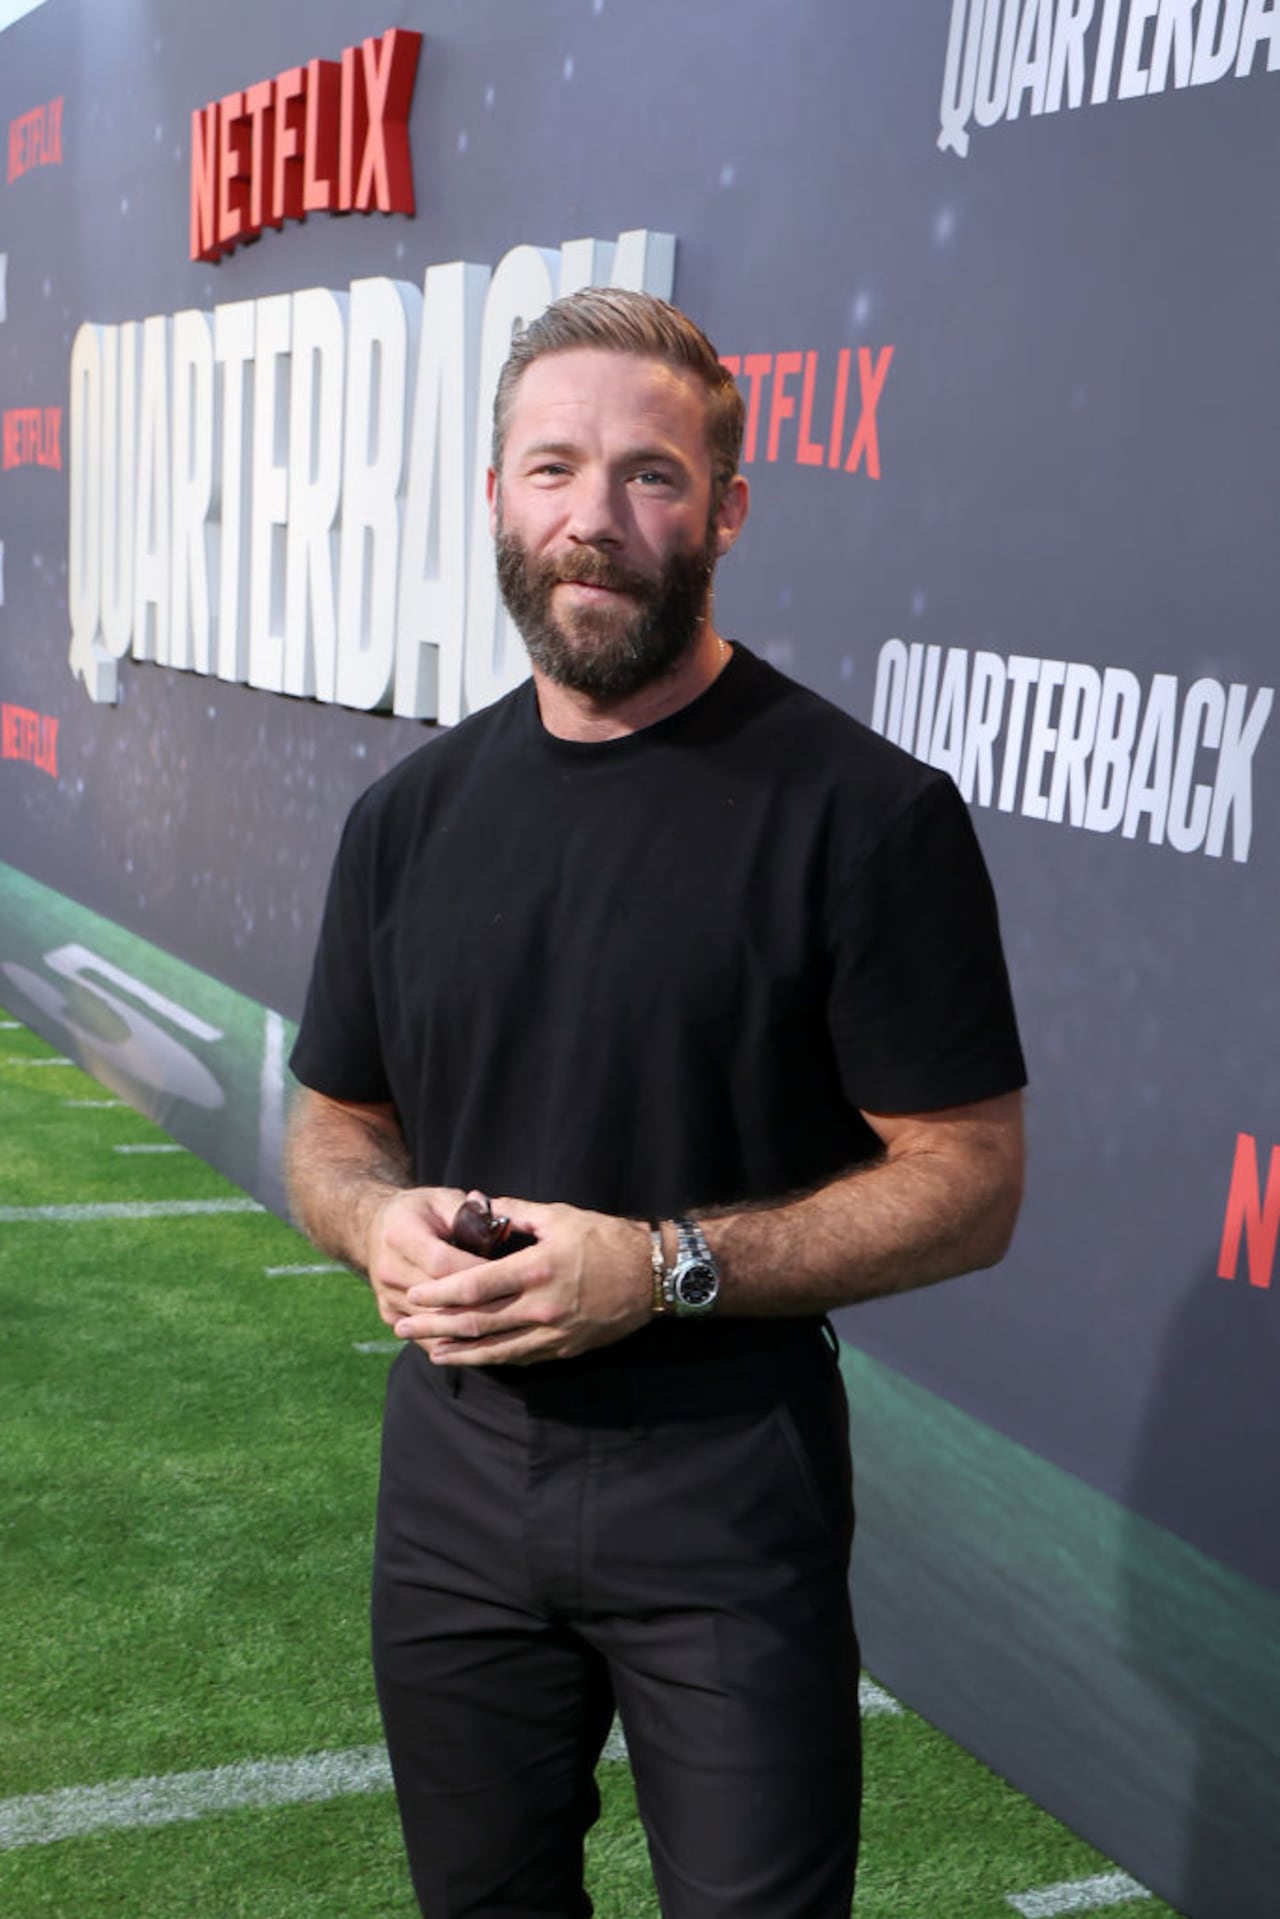 Julian Edelman. (Photo by Randy Shropshire/Getty Images for Netflix)